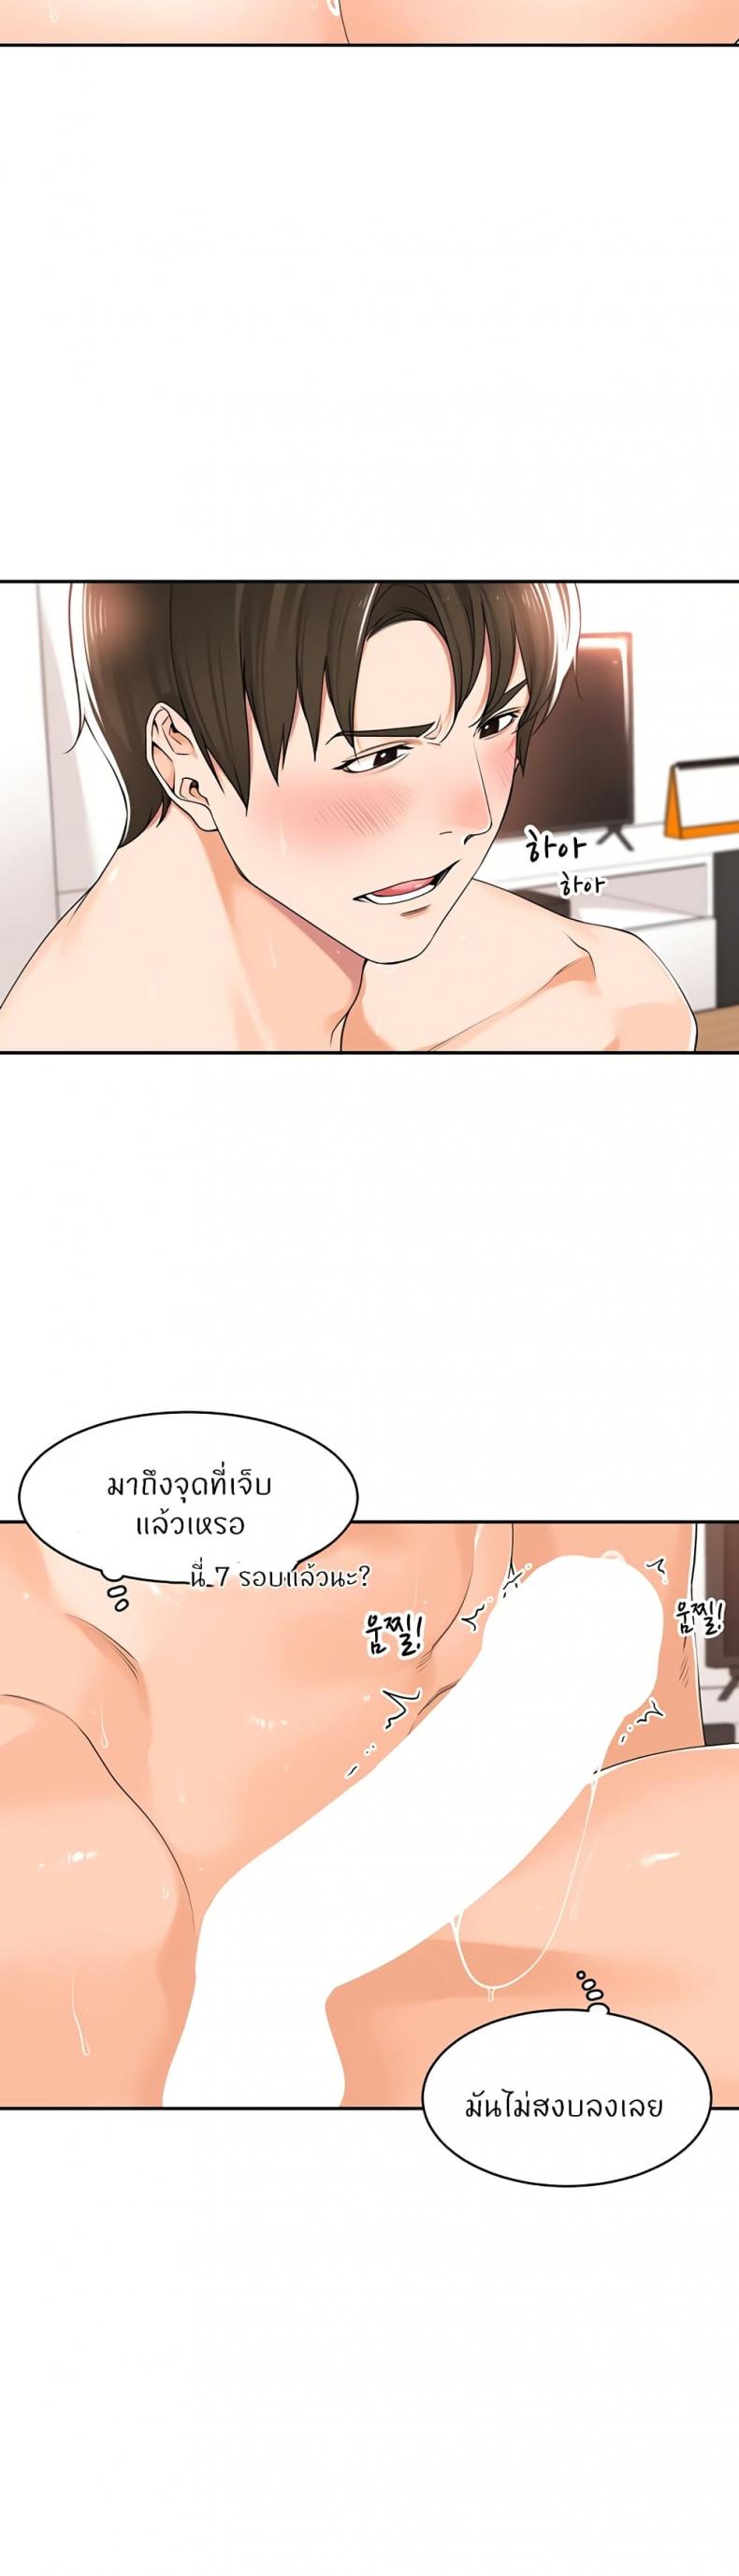 Manager, Please Scold Me 11 ภาพที่ 13